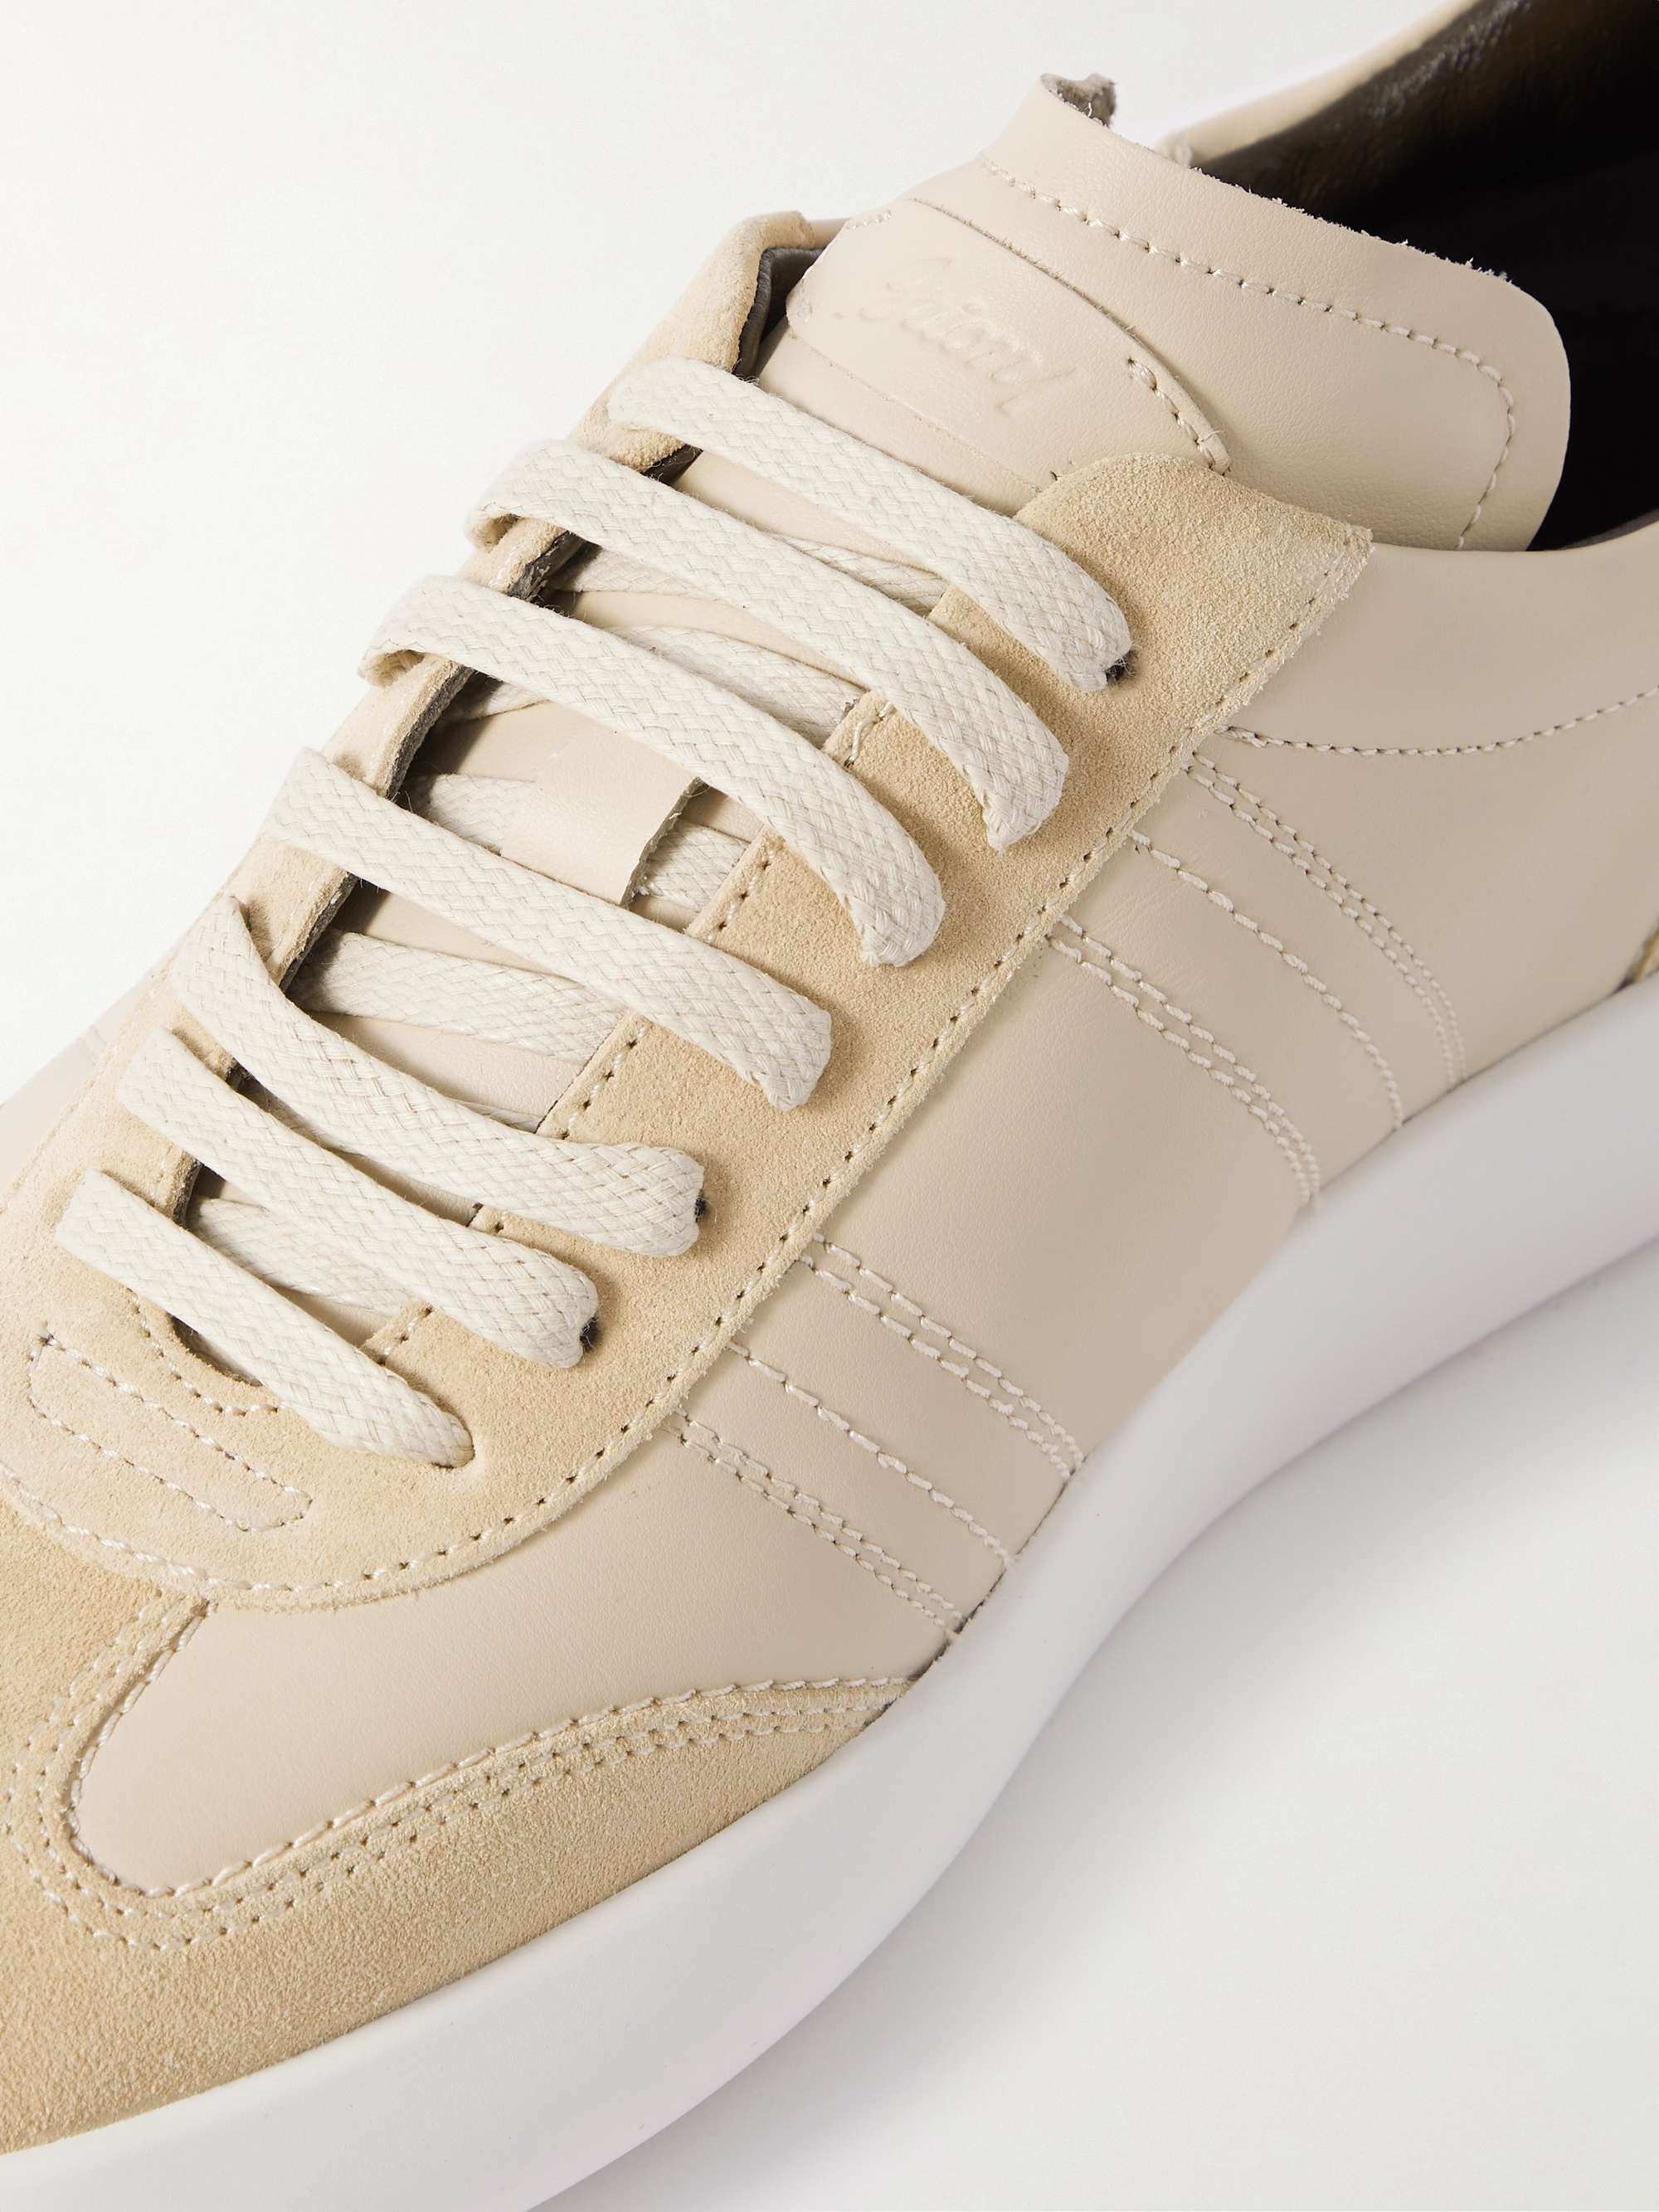 BRIONI Suede-Trimmed Leather Sneakers